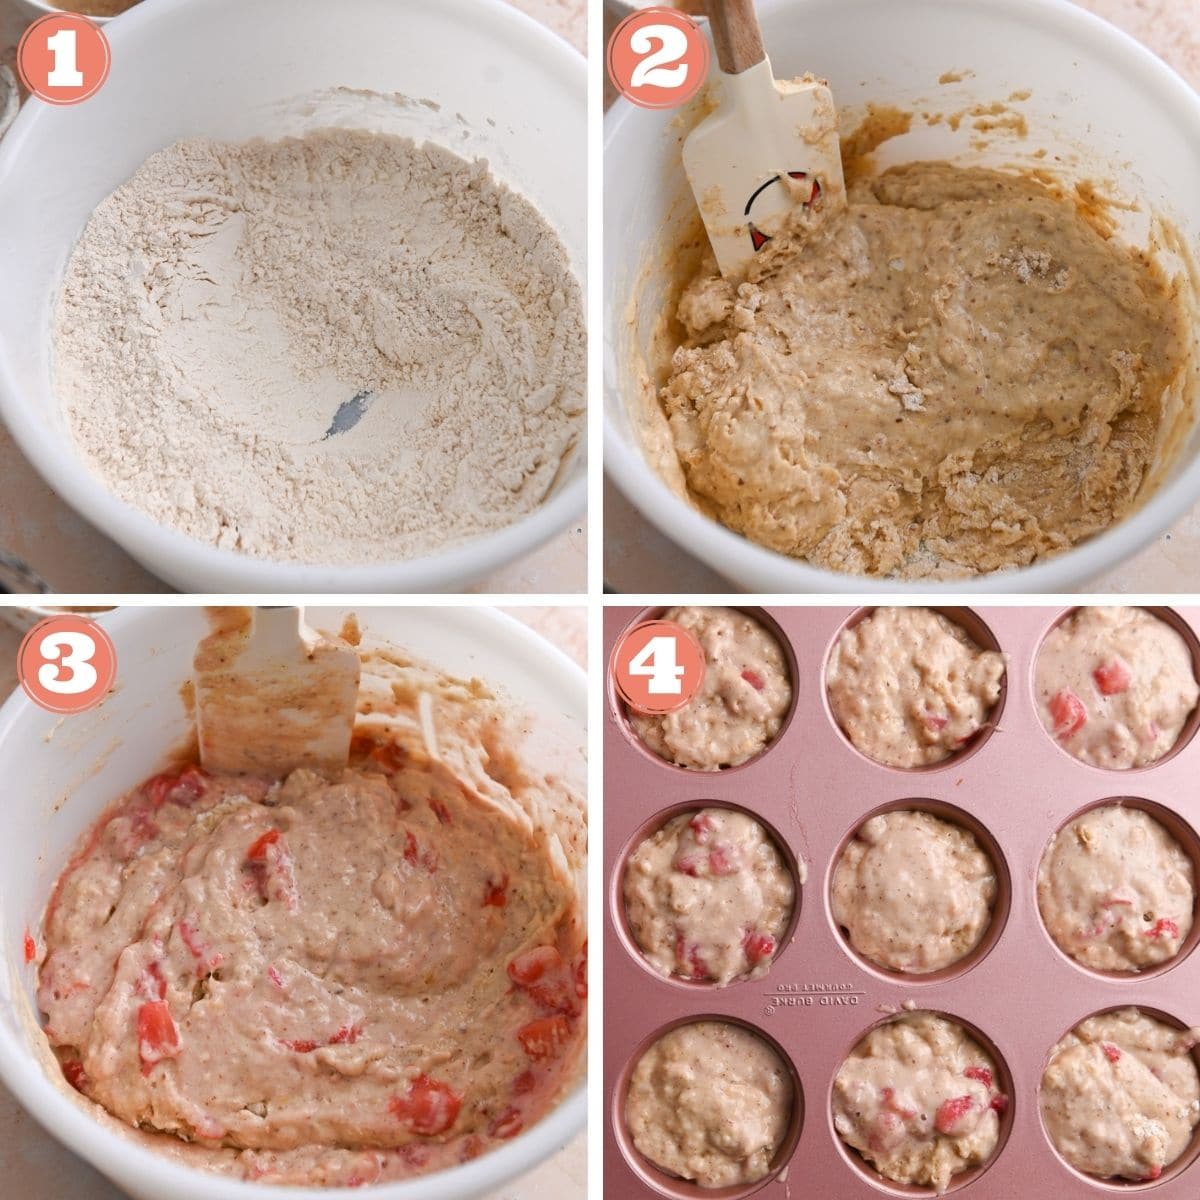 Steps showing how to make strawberry muffins.